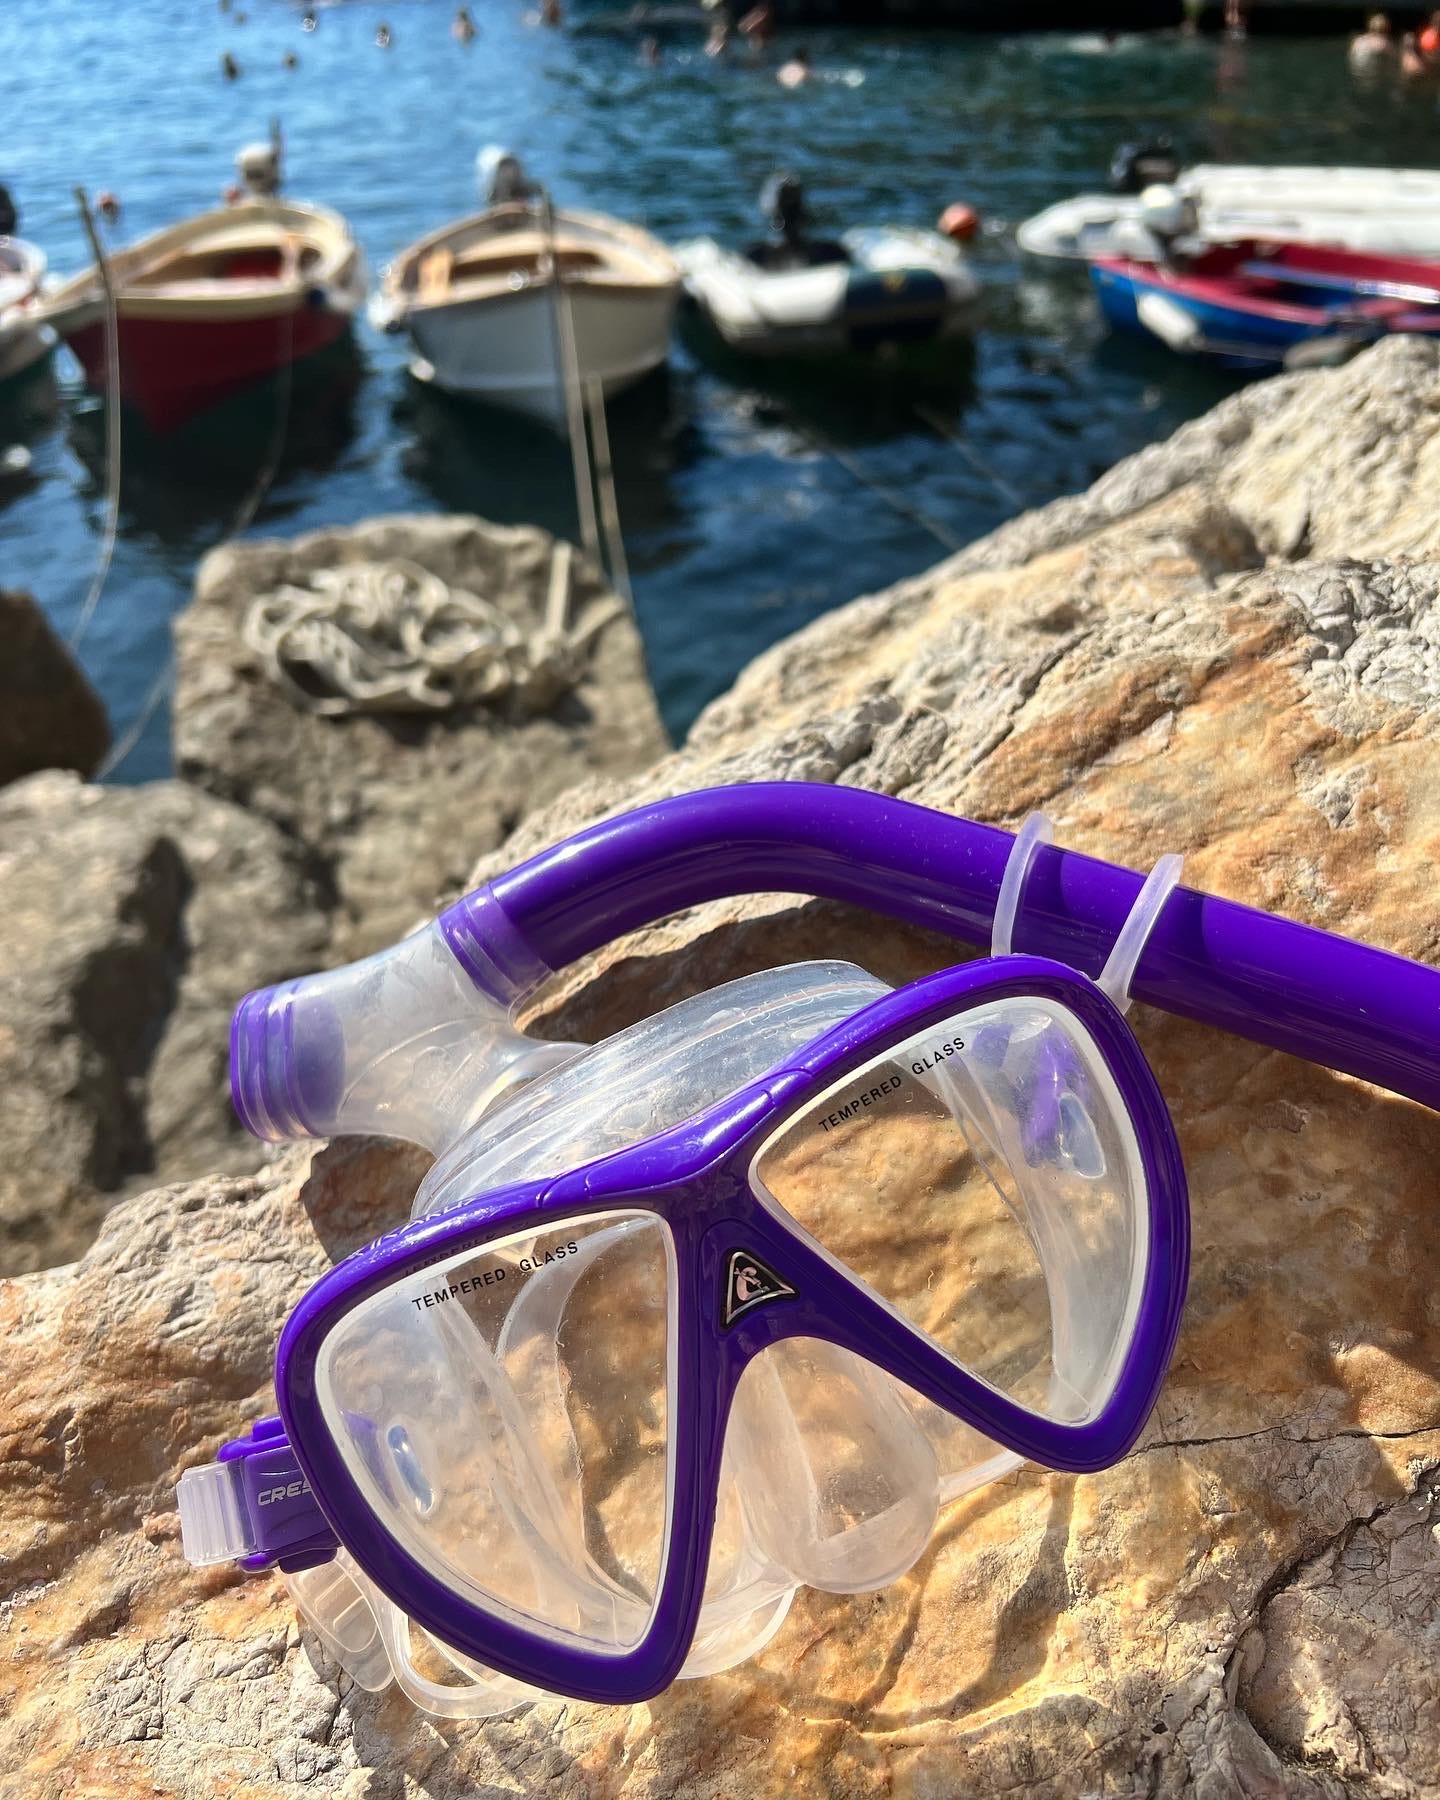 Snorkeling mask on rocks with boats in the background